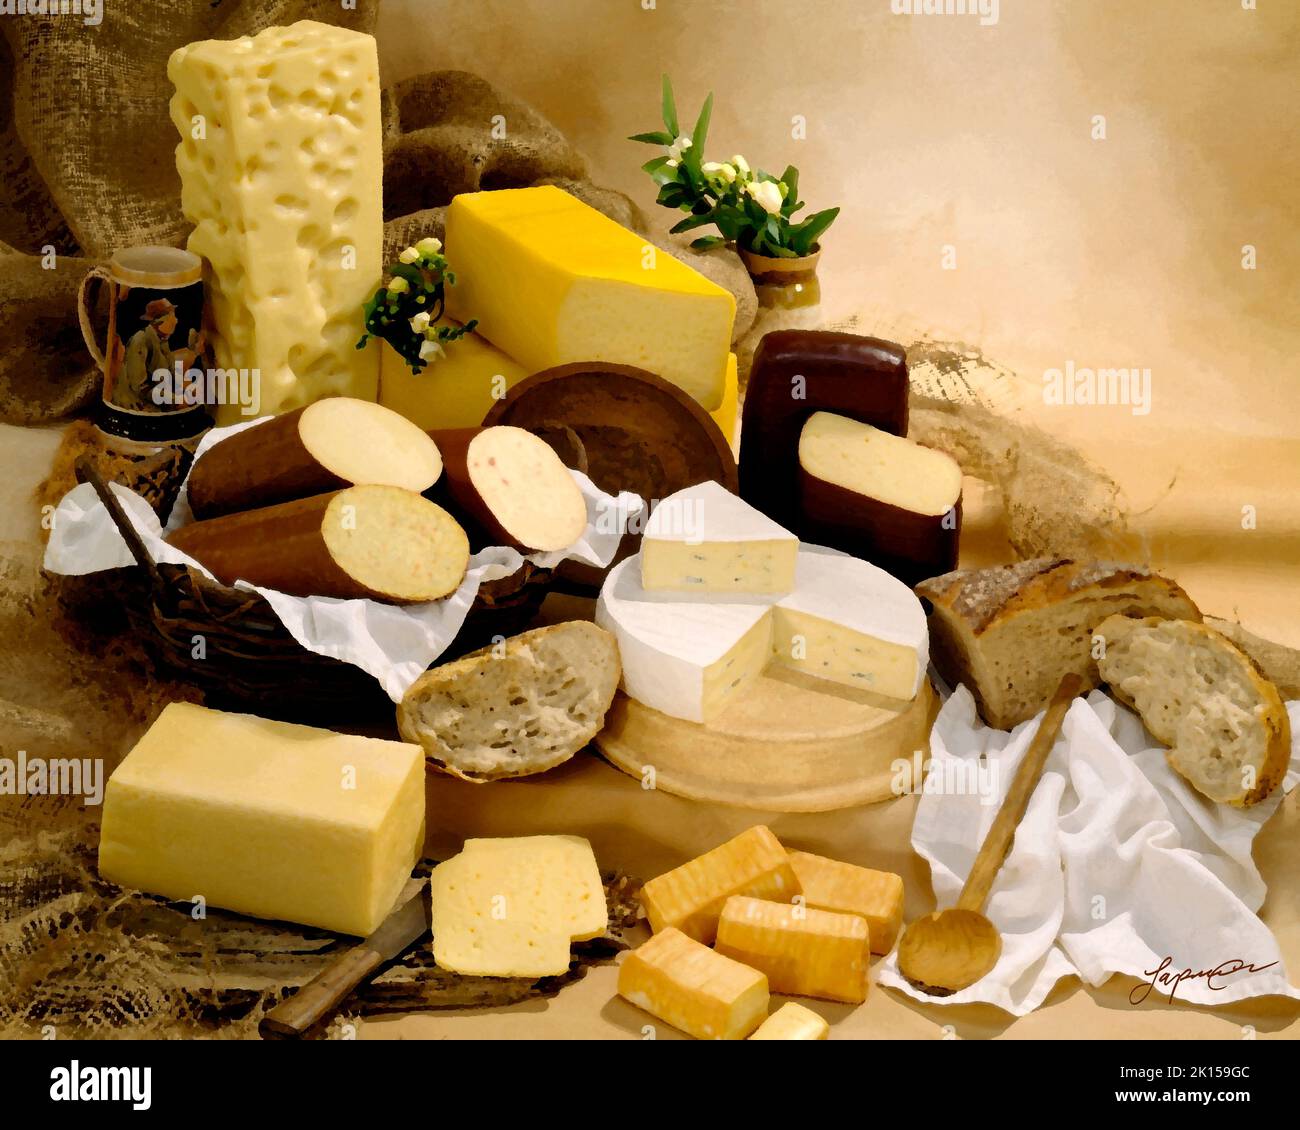 German Cheeses in group color photograph, painterly filter applied. Tan toned mottled background. Studio tabletop, classic Image Stock Photo